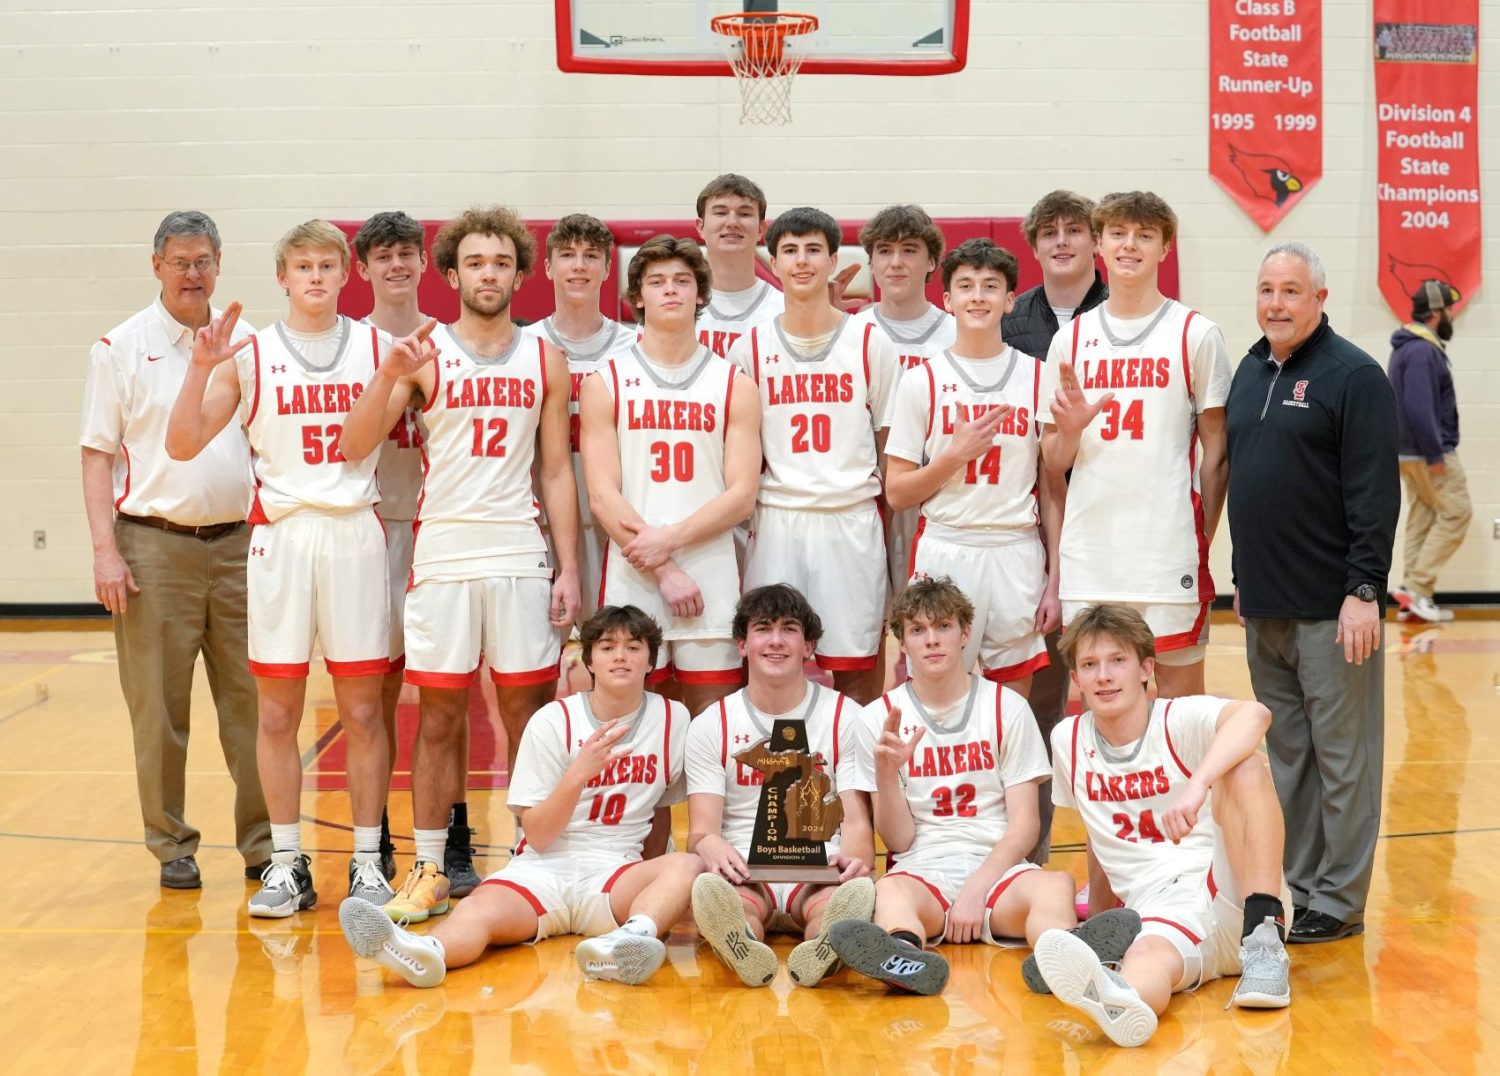 Chalk up another district basketball title for the Spring Lake Lakers after victory over Fruitport